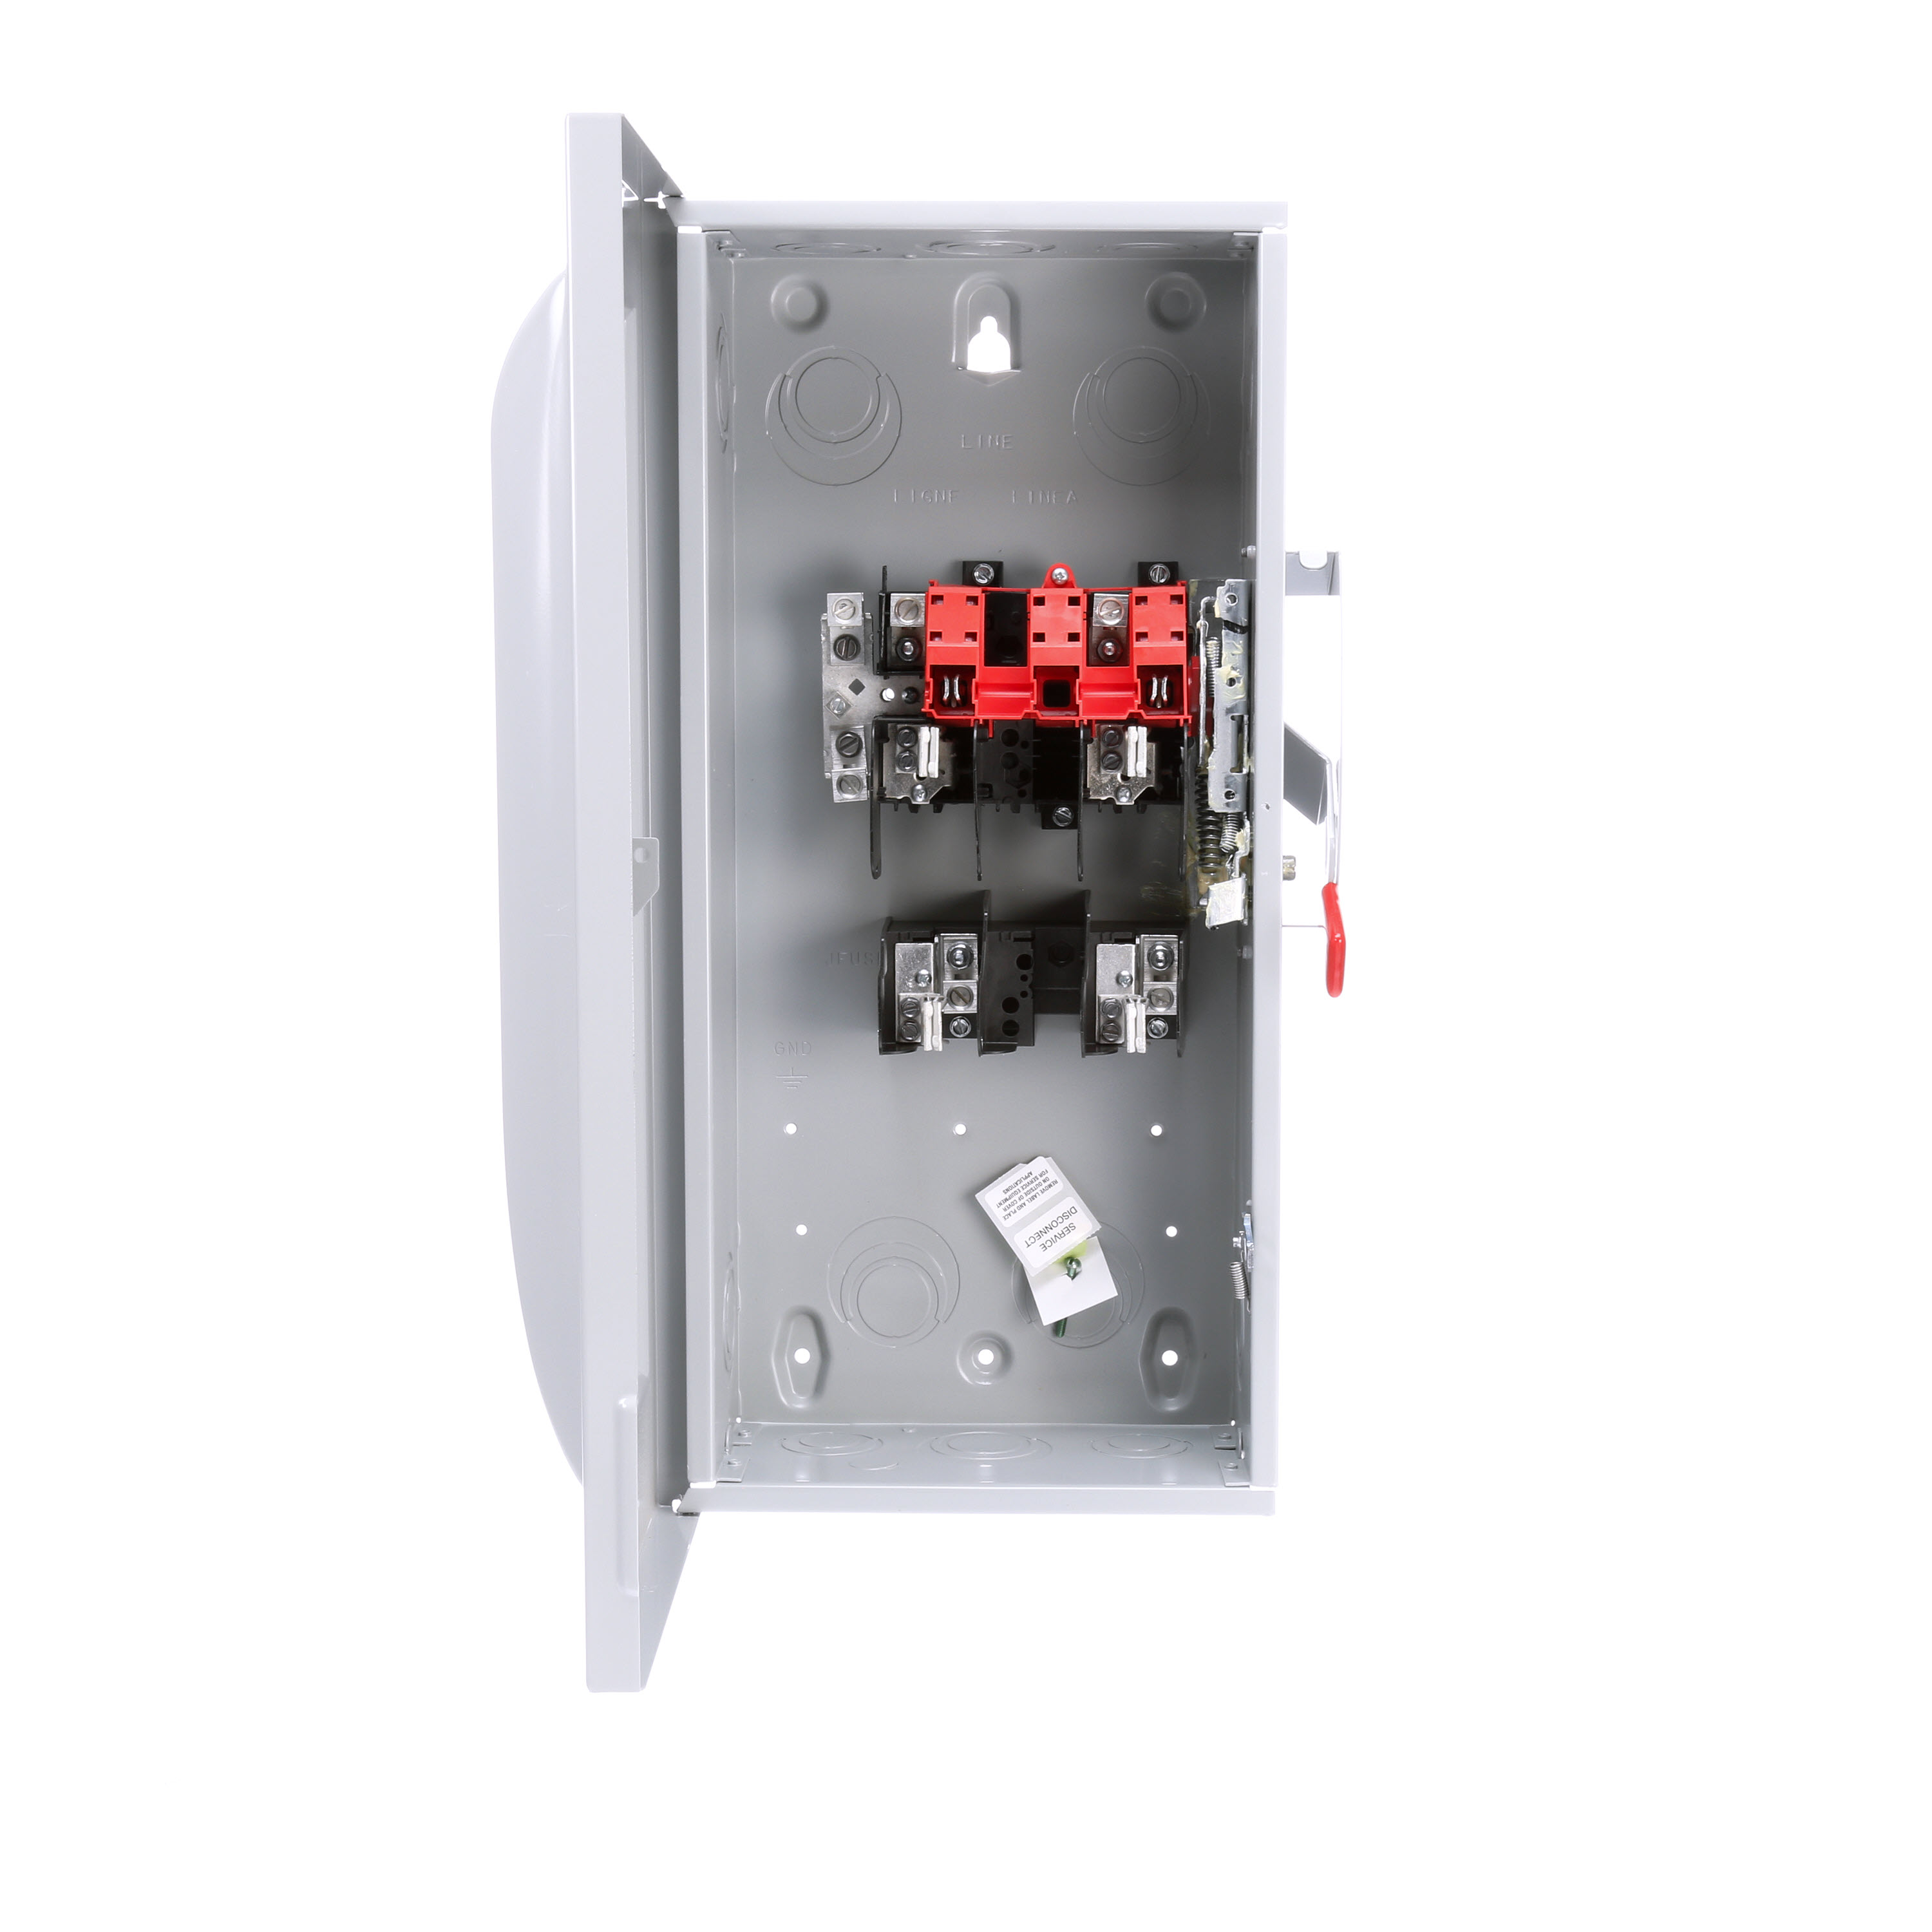 Siemens Low Voltage Circuit Protection General Duty Safety Switch. 2-Pole 2-Fuse and solid neutral Fused in a type 1 enclosure (indoor). Rated 240VAC (100A). Horse power (Std, Time delay) fused 1-PH 2-W (7-1/2, 15), 3-PH 3-W (15, 30), 250VDC (20). Special features service entrance labeled suitable for 3-PH motor loads.